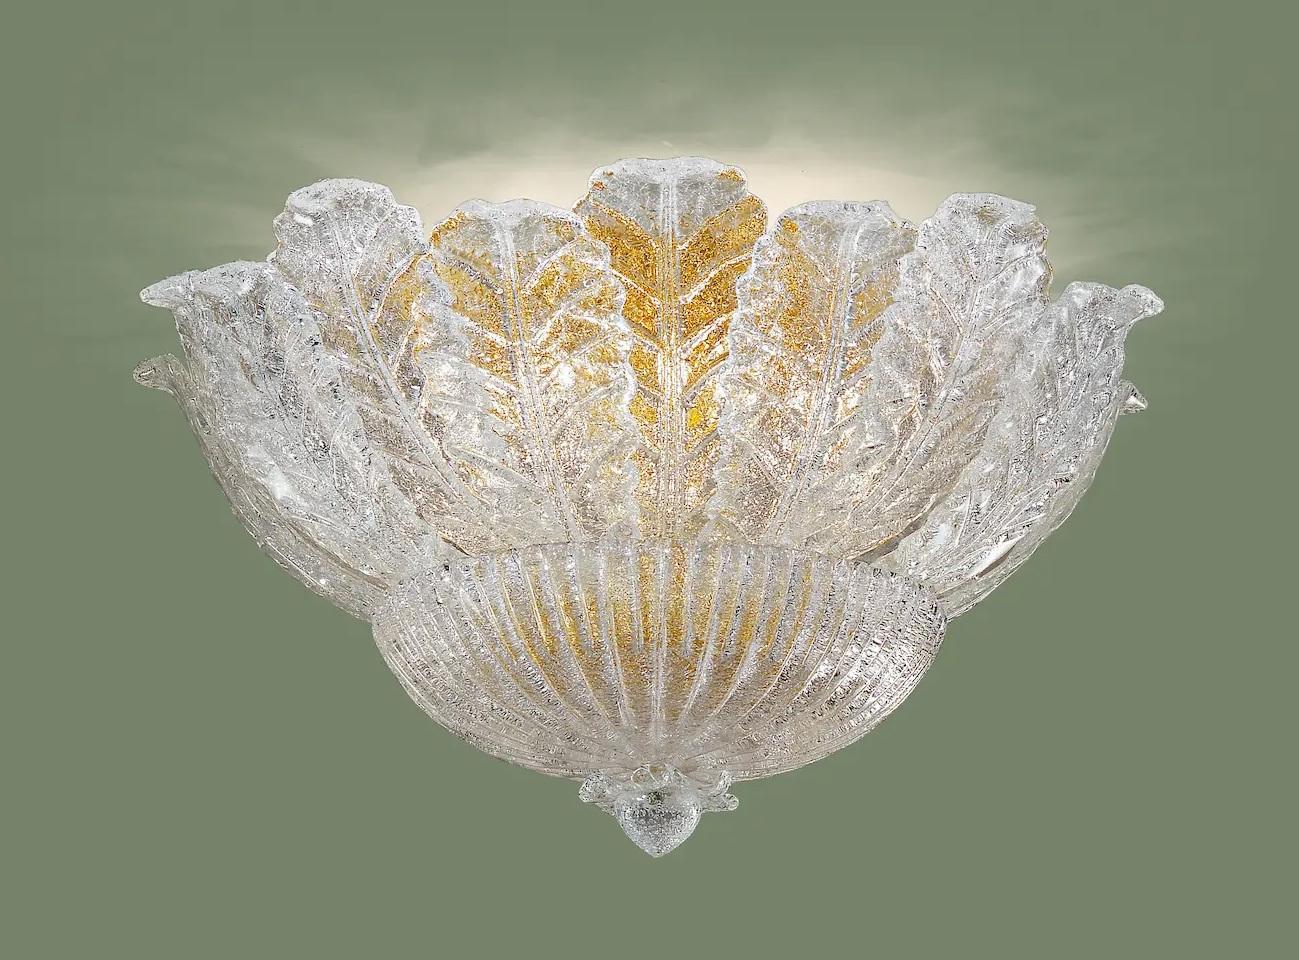 Italian flush mount with clear Murano glass leaves hand blown in Graniglia technique to produce granular textured effect, mounted on 24 K gold plated finish metal frame by Fabio Ltd / Made in Italy
6 lights / E12 or E14 type / max 40W each
Measures: